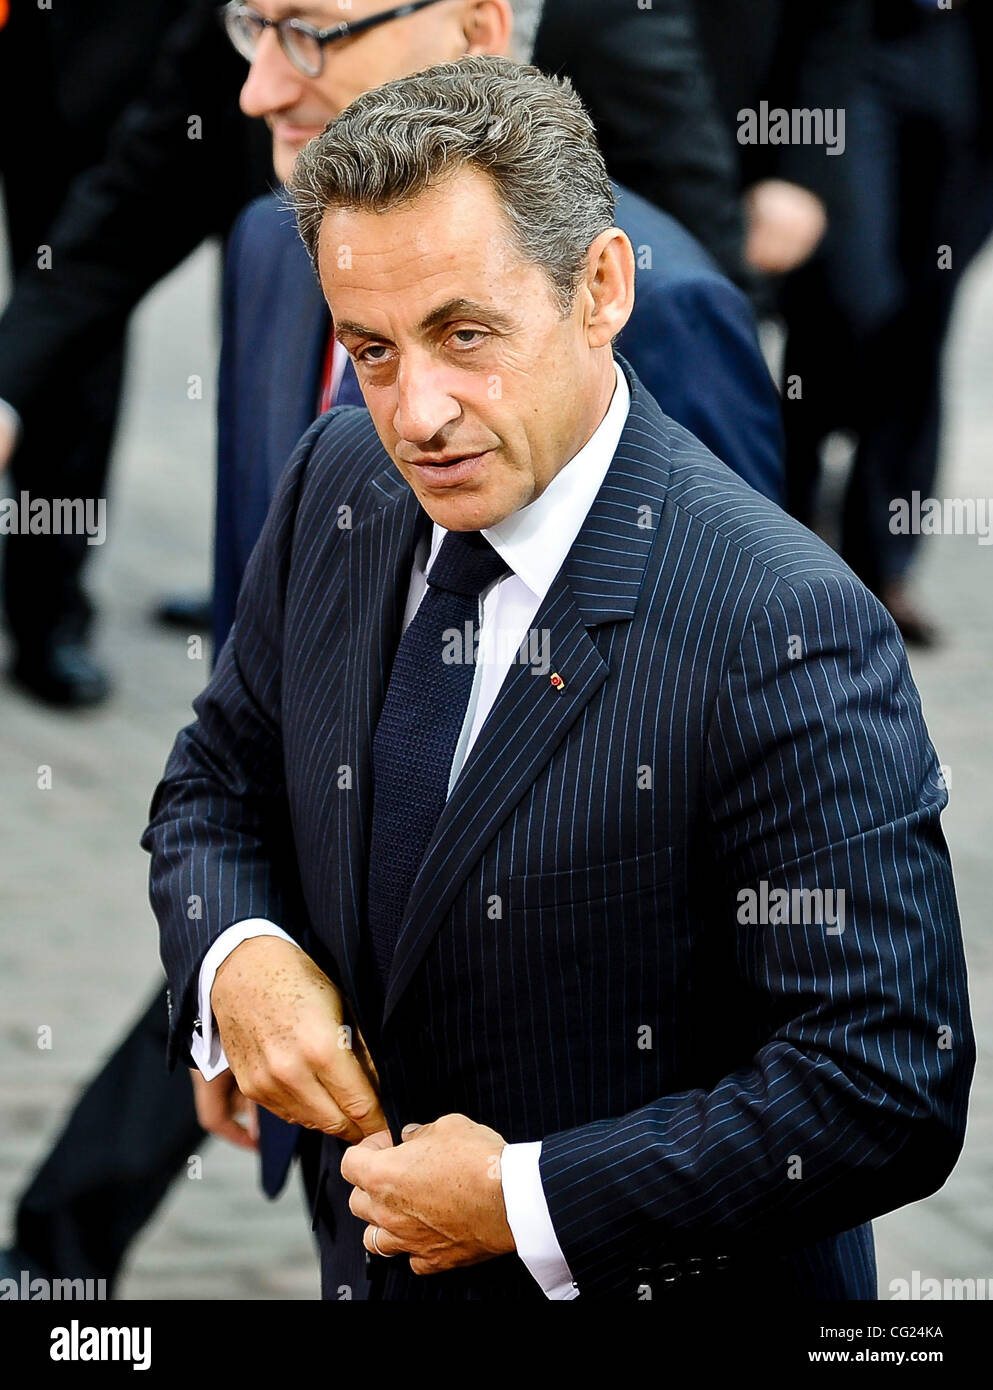 July 21, 2011 - Brussels, Belgium - French President NICOLAS SARKOZY arrives for an EU summit at the European Council headquarters in  Brussels. The Eurogroup chairman said that eurozone leaders would not rule out a Greek debt default but that everything should be done to prevent it. (Credit Image:  Stock Photo